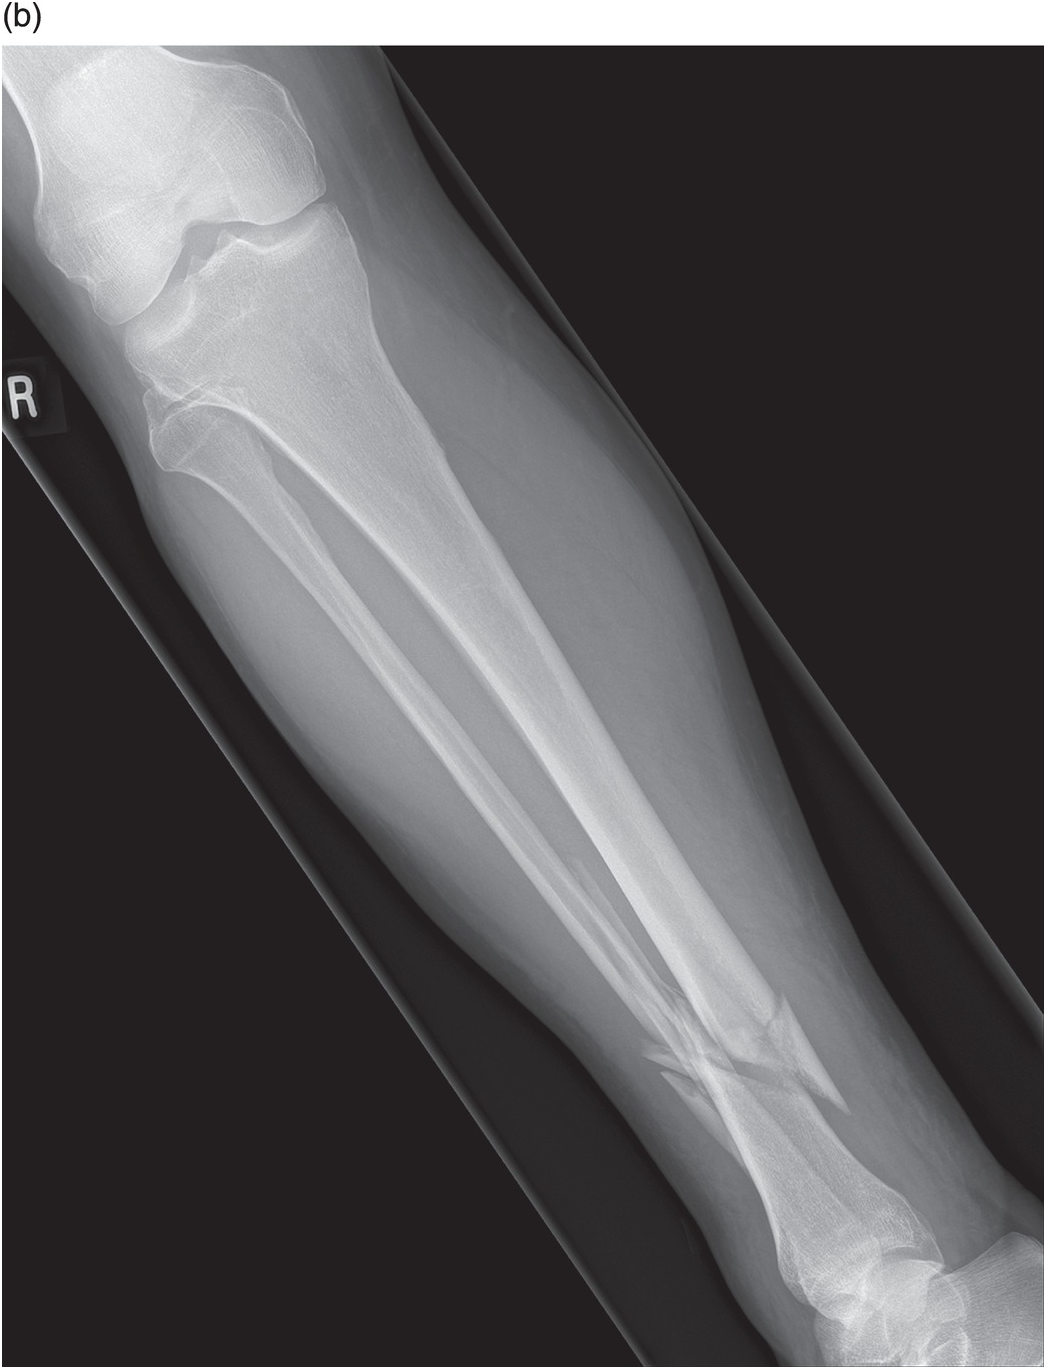 What happpens if the cast is too tight around the proximal portion of the  leg and presses in against the neck of fibula. Where would you predict the  patient would experience tingling